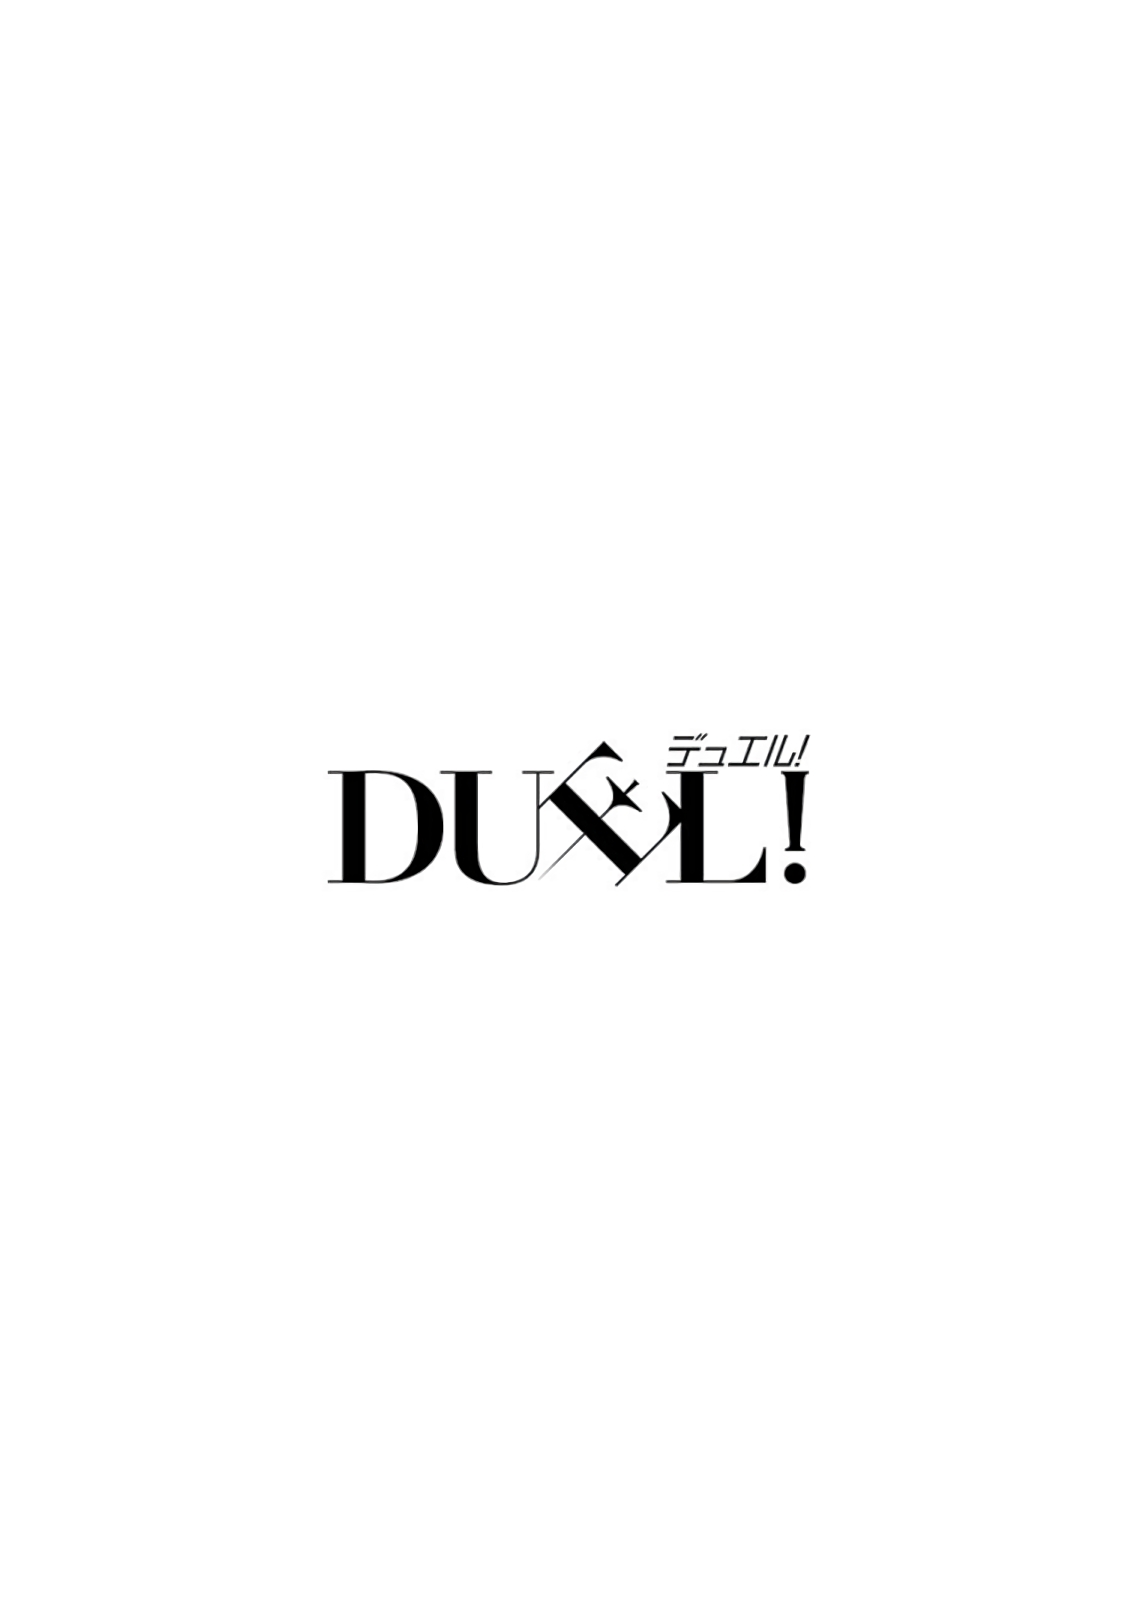 Duel! Vol. 3 Ch. 22 I hate it